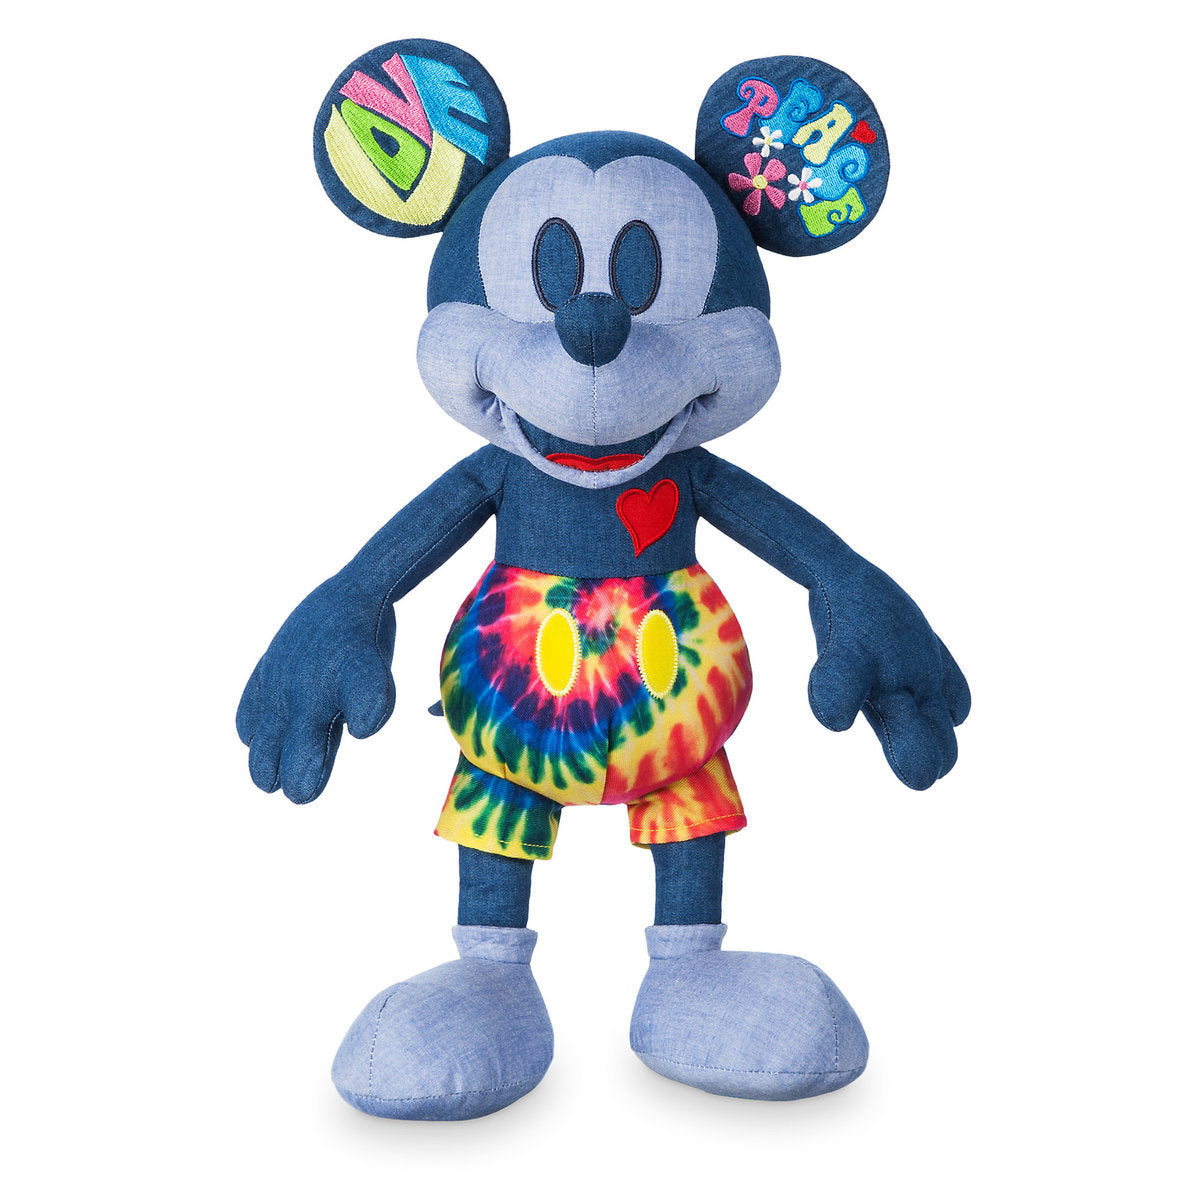 Mickey Mouse Memories Plush - June 2018 - Limited Edition